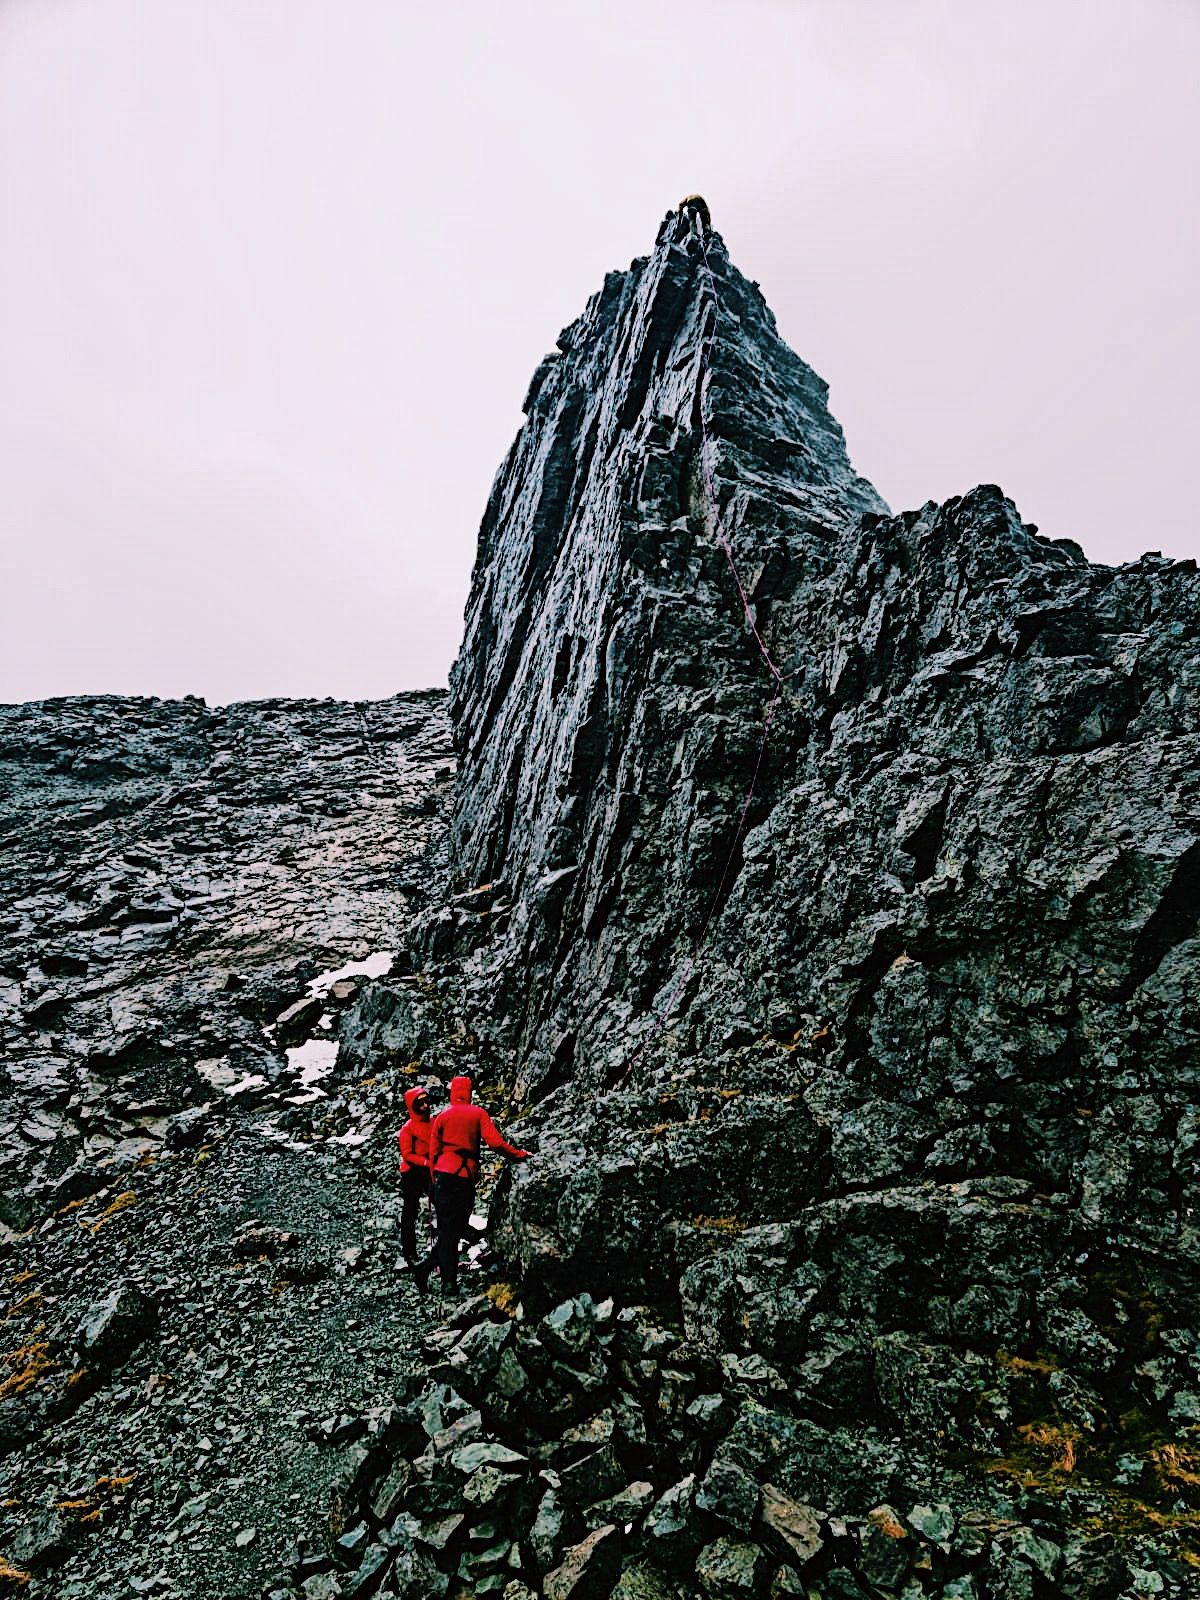 Two climbers getting ready to climb Inaccessible Pinnacle, on the Isle of Skye.